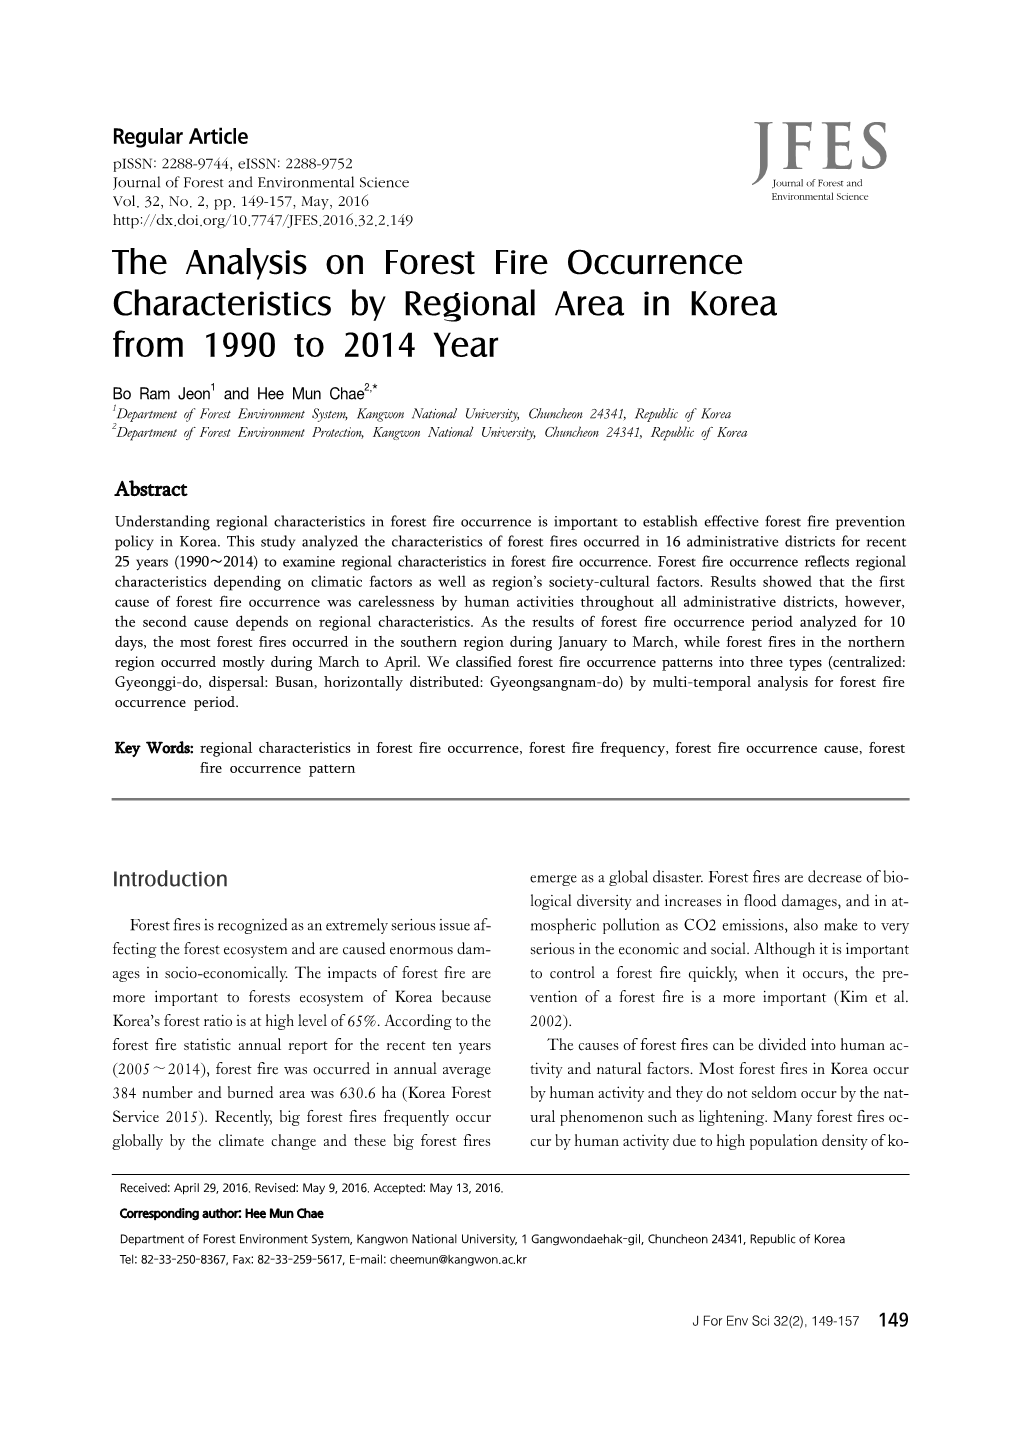 The Analysis on Forest Fire Occurrence Characteristics by Regional Area in Korea from 1990 to 2014 Year